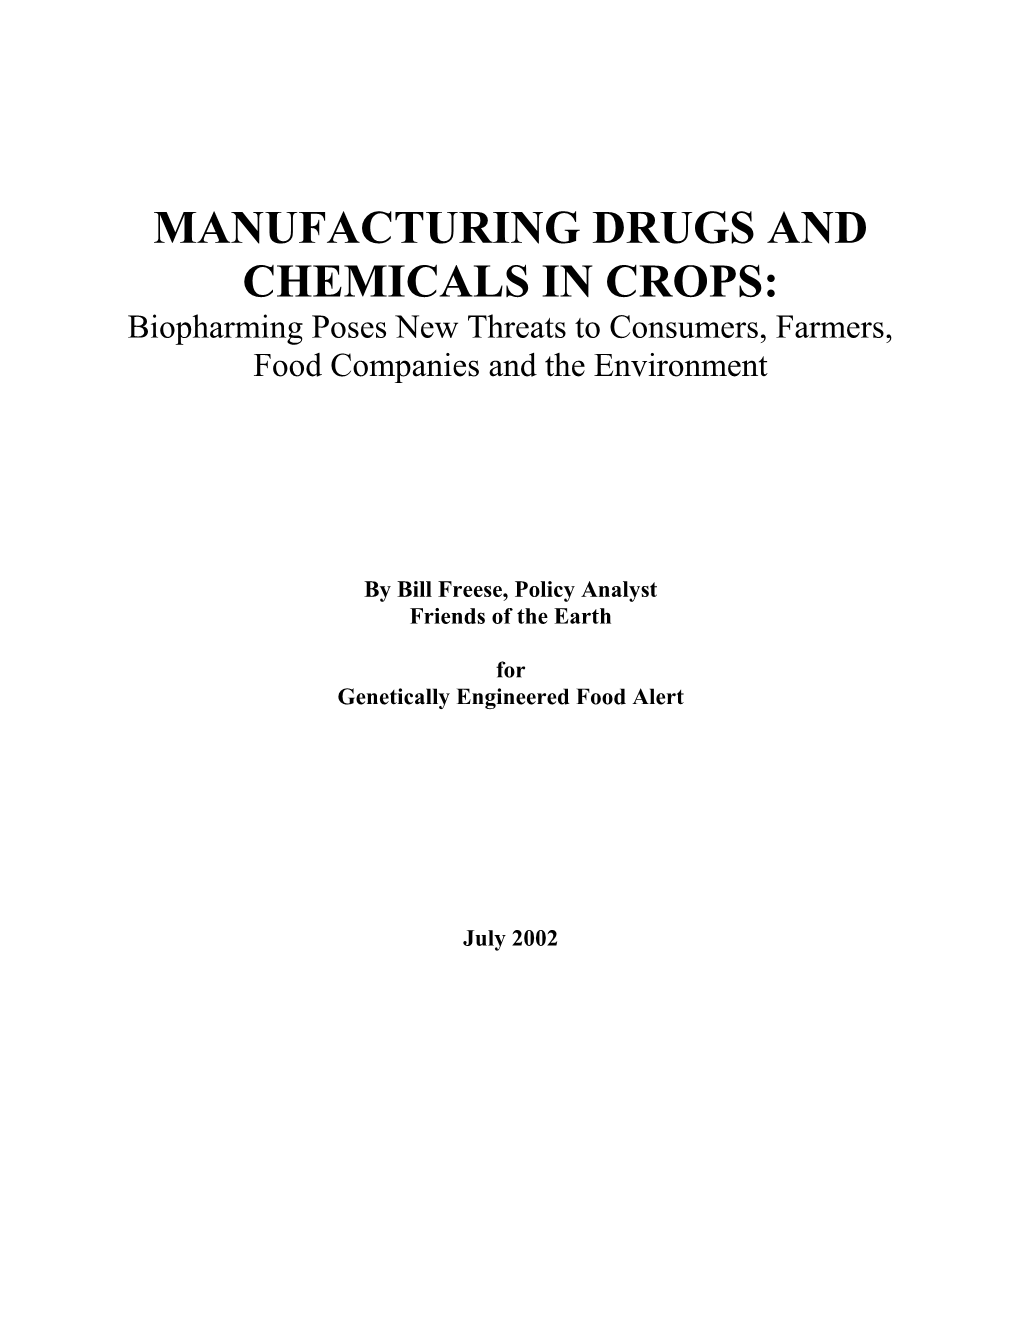 Manufacturing Drugs and Chemicals in Crops